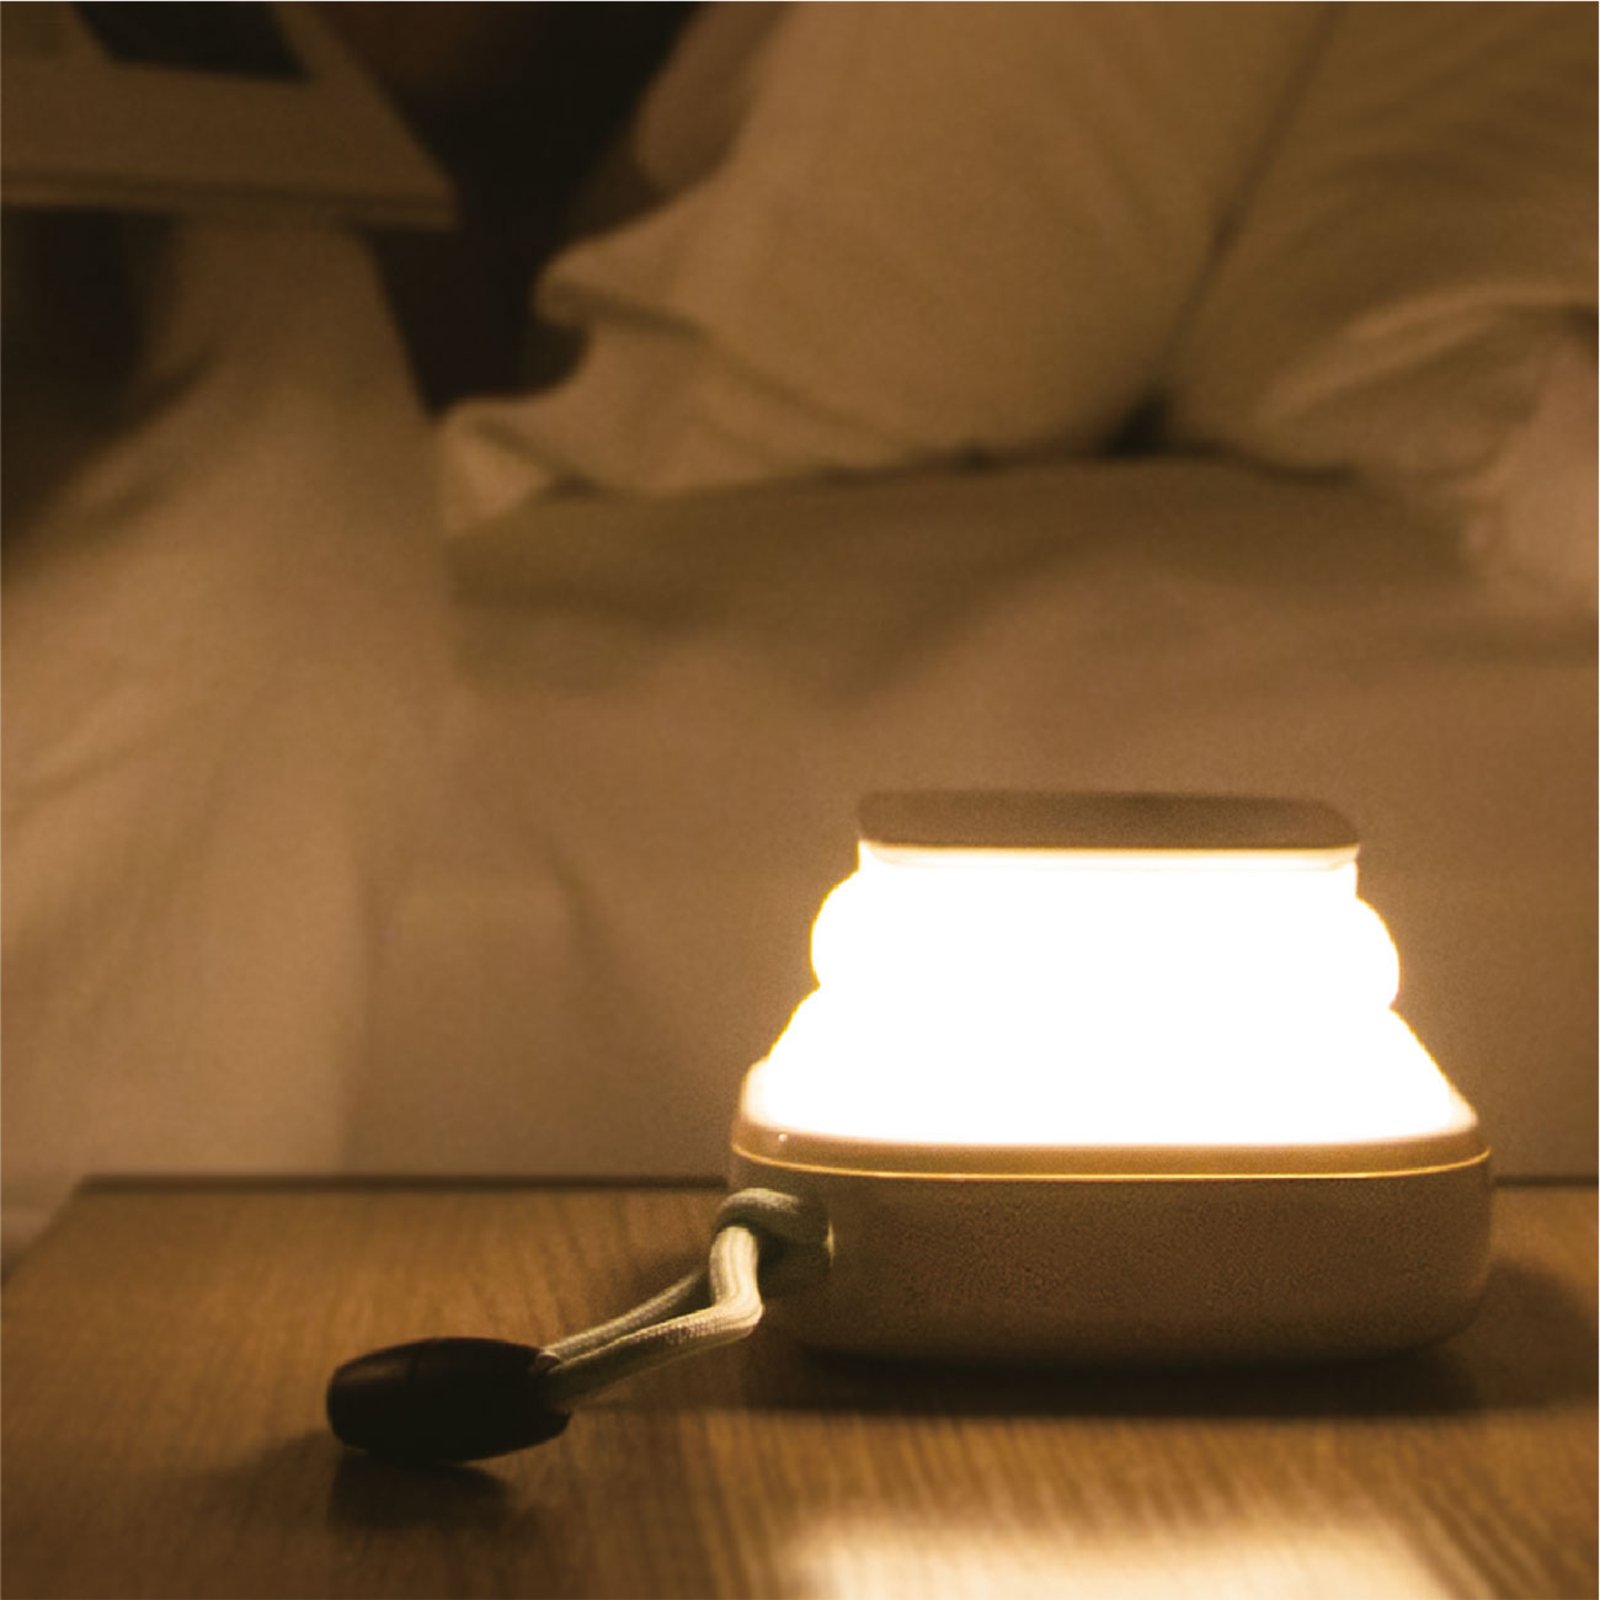 MiPow PopCandle 10000 mobile charger, night light